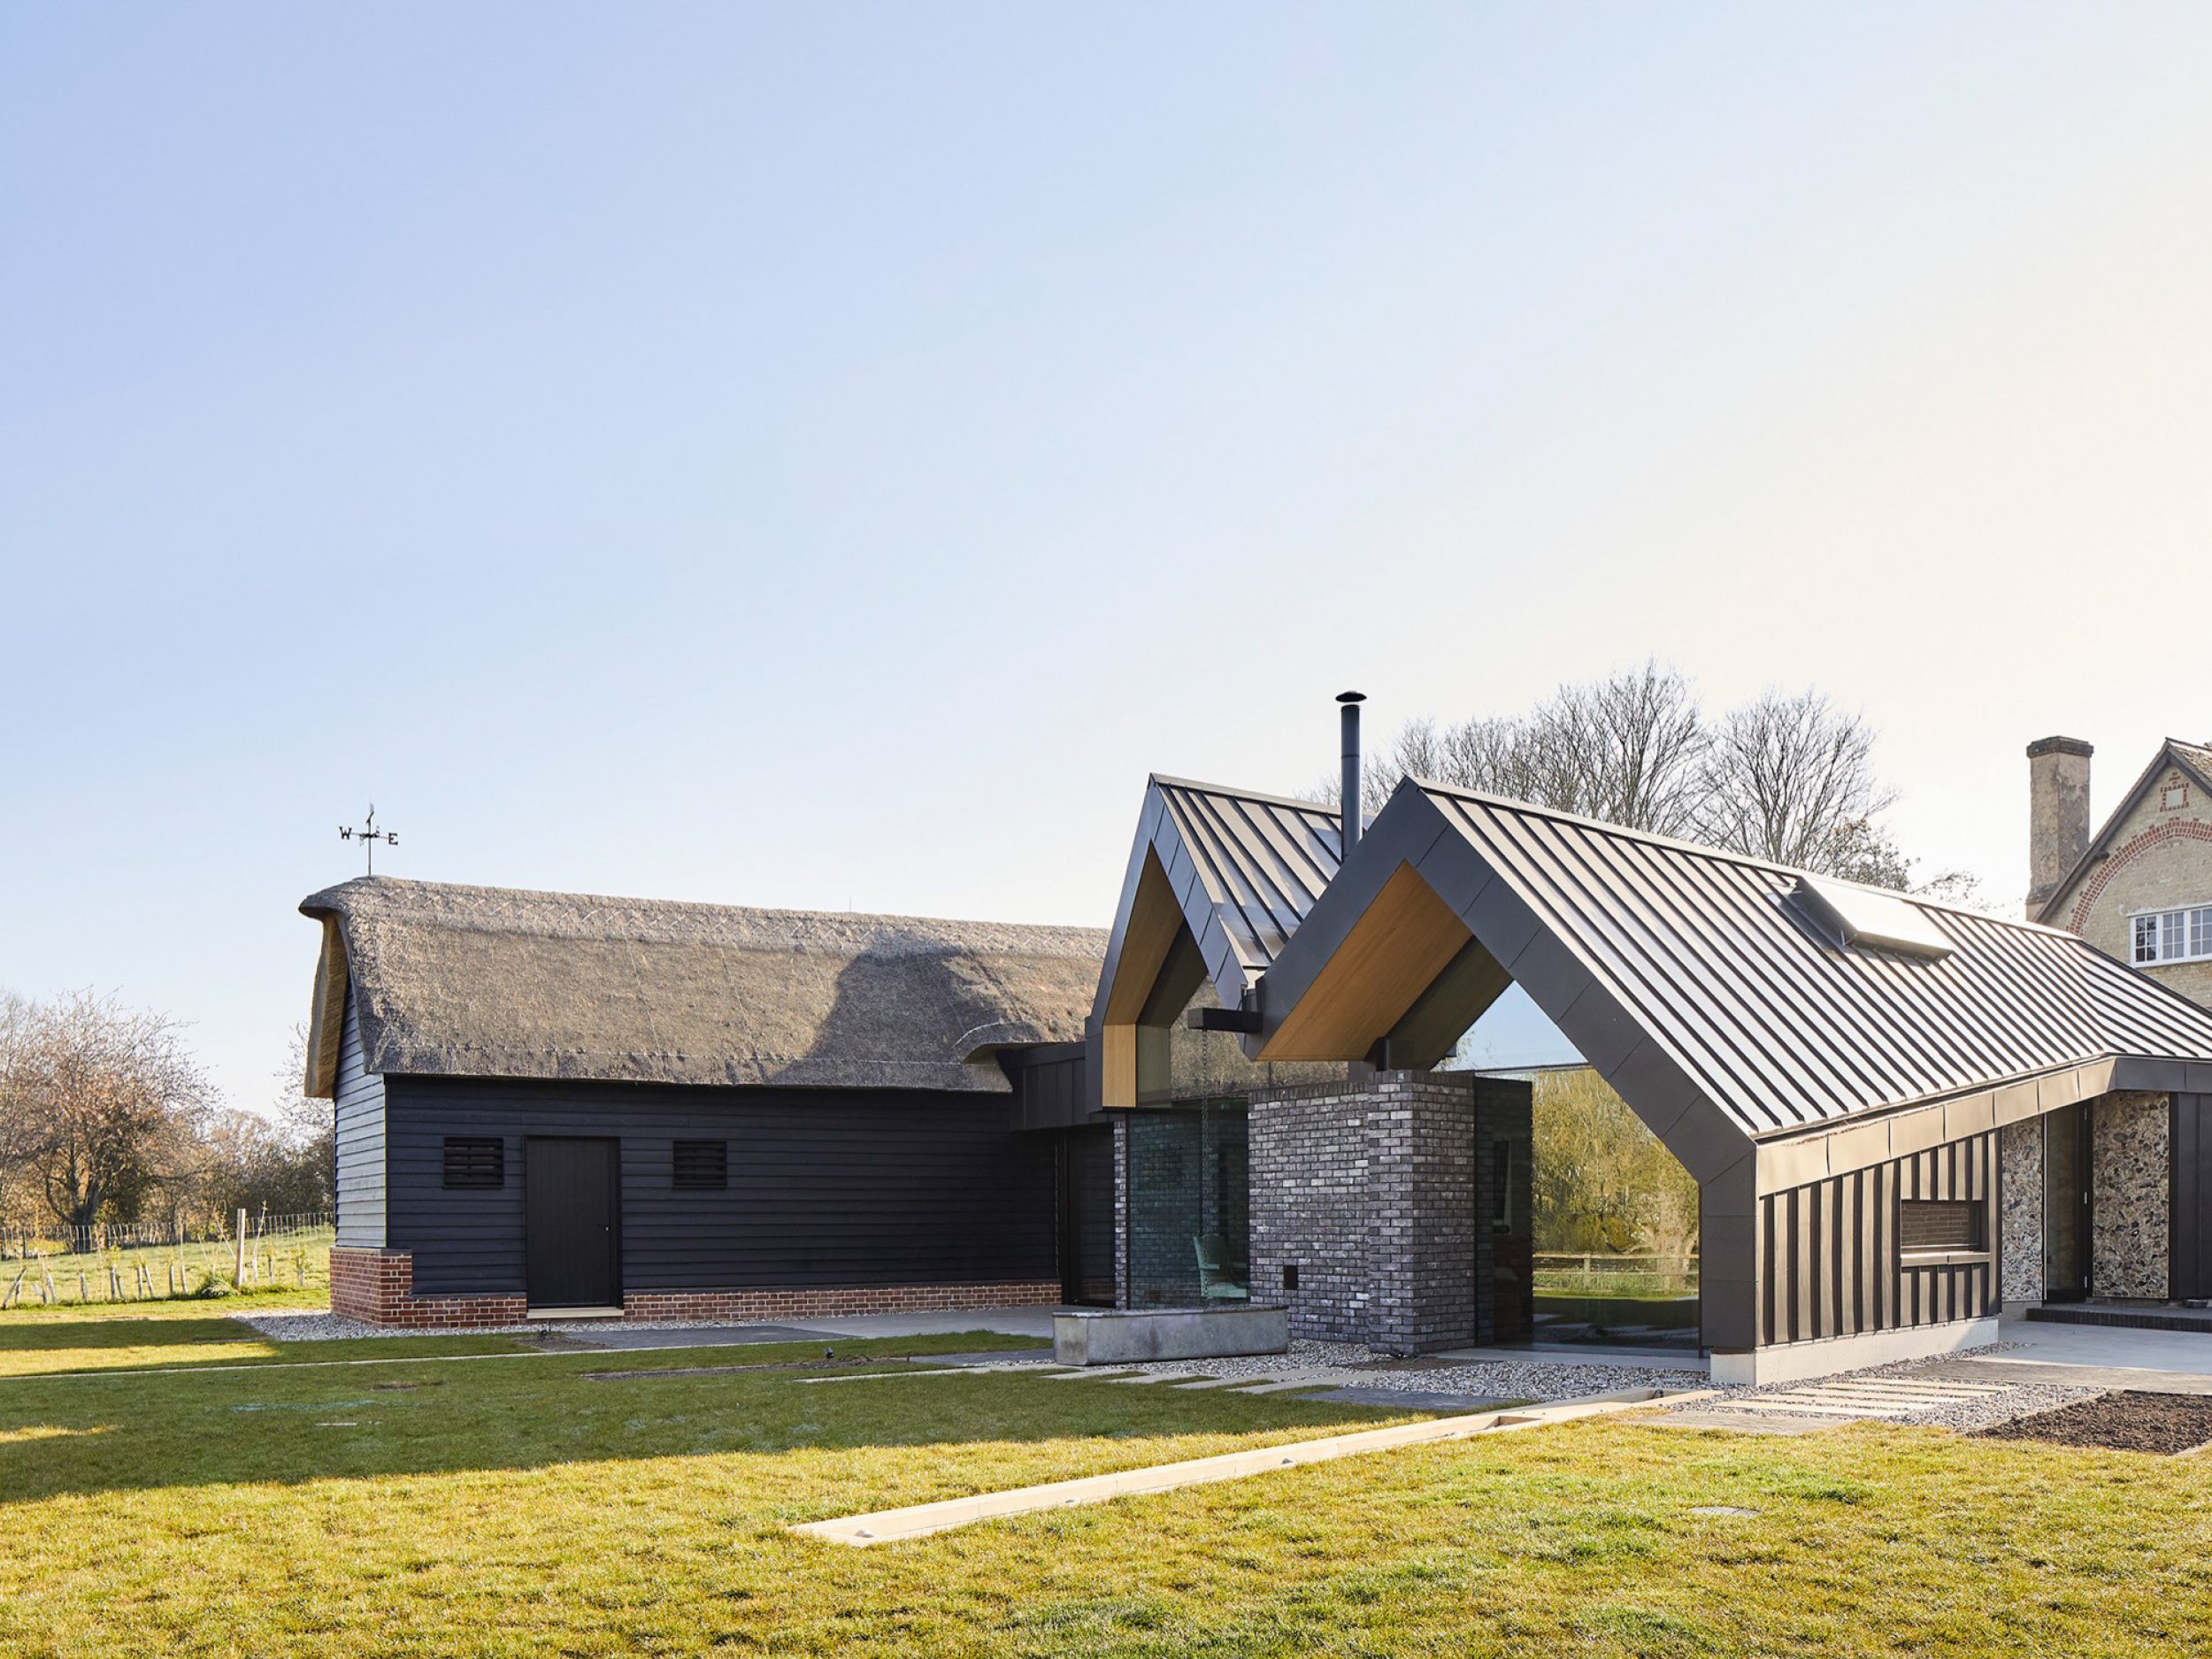 pitched zinc roofs meeting thatched roof at eye-level | cambridge architects CDC Studio